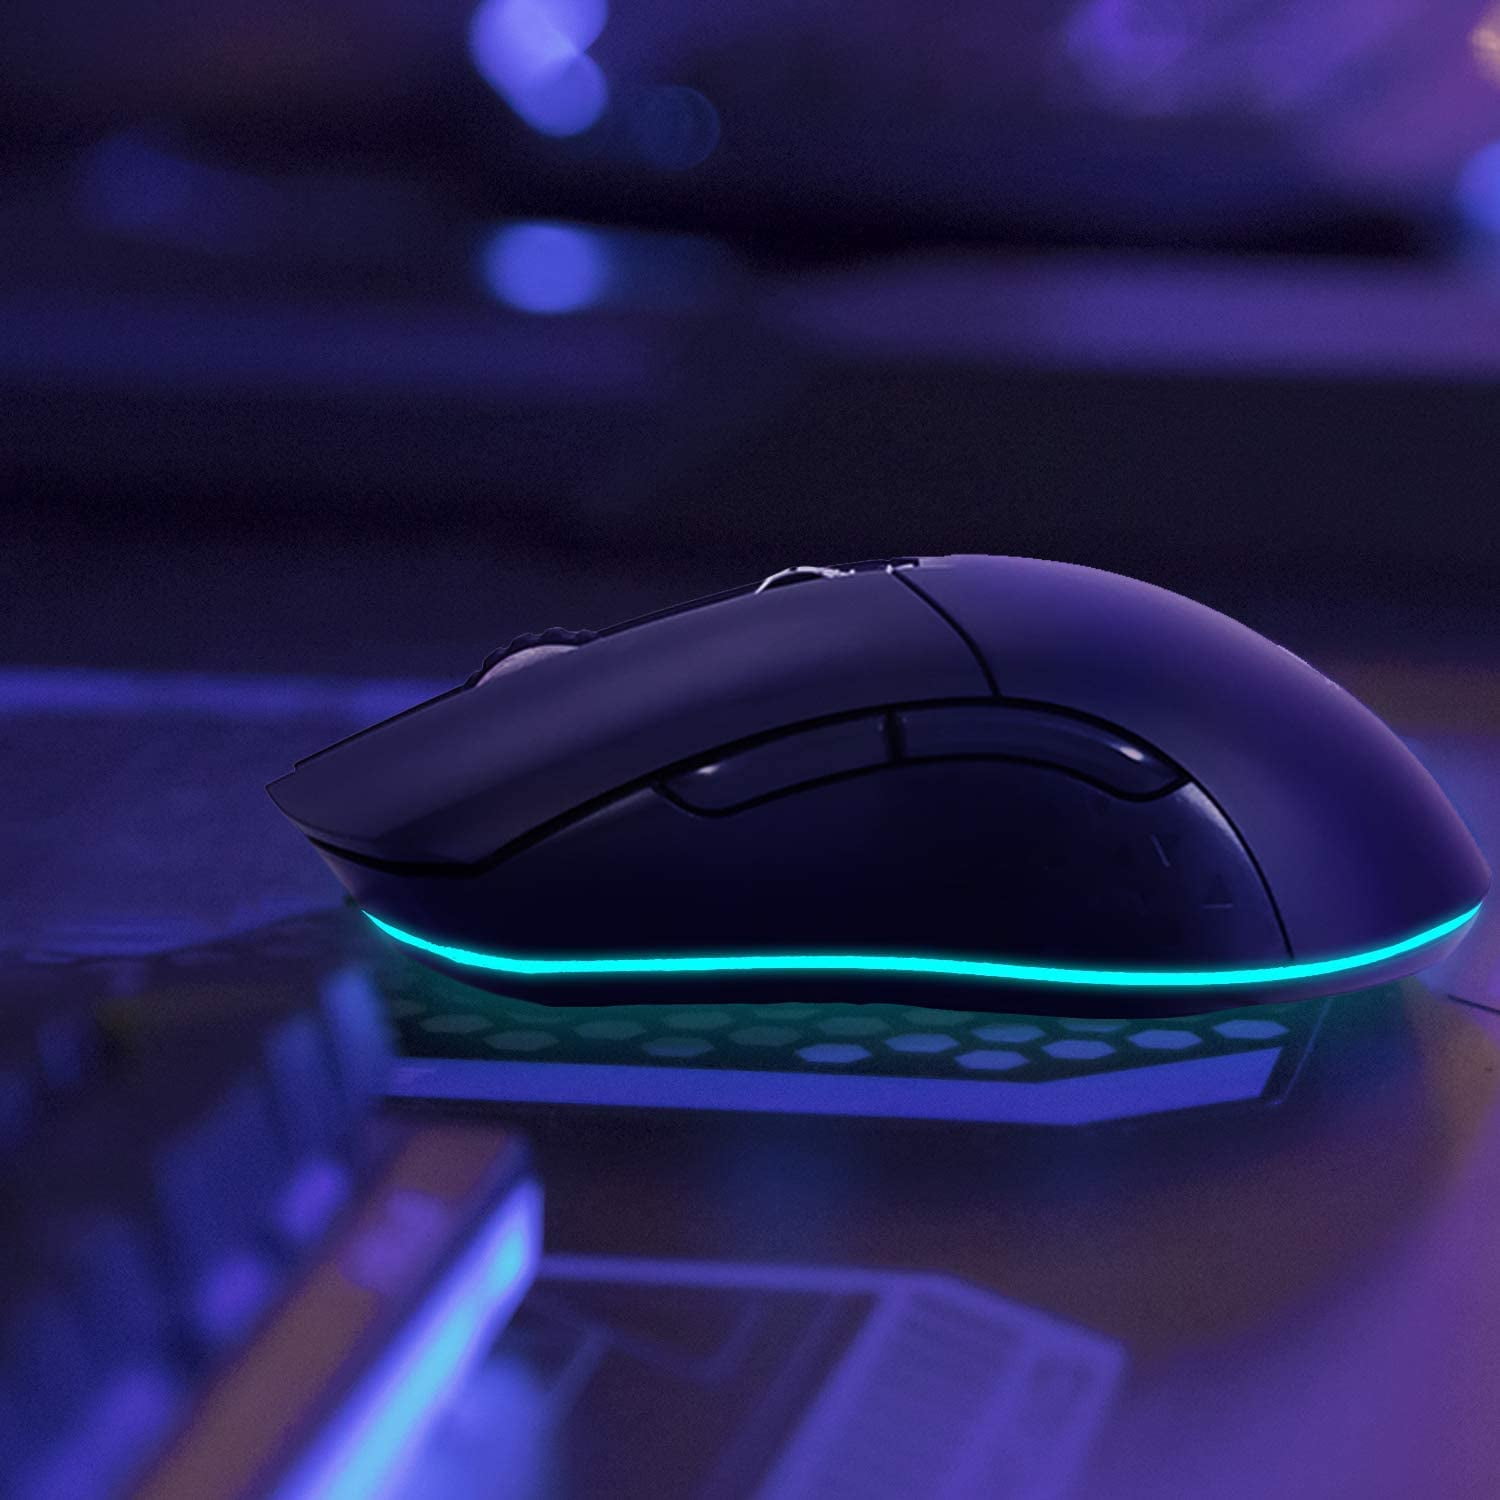 Klim Blaze Gaming Pro Wirless Mouse With Side Buttons for Sale in Aventura,  FL - OfferUp